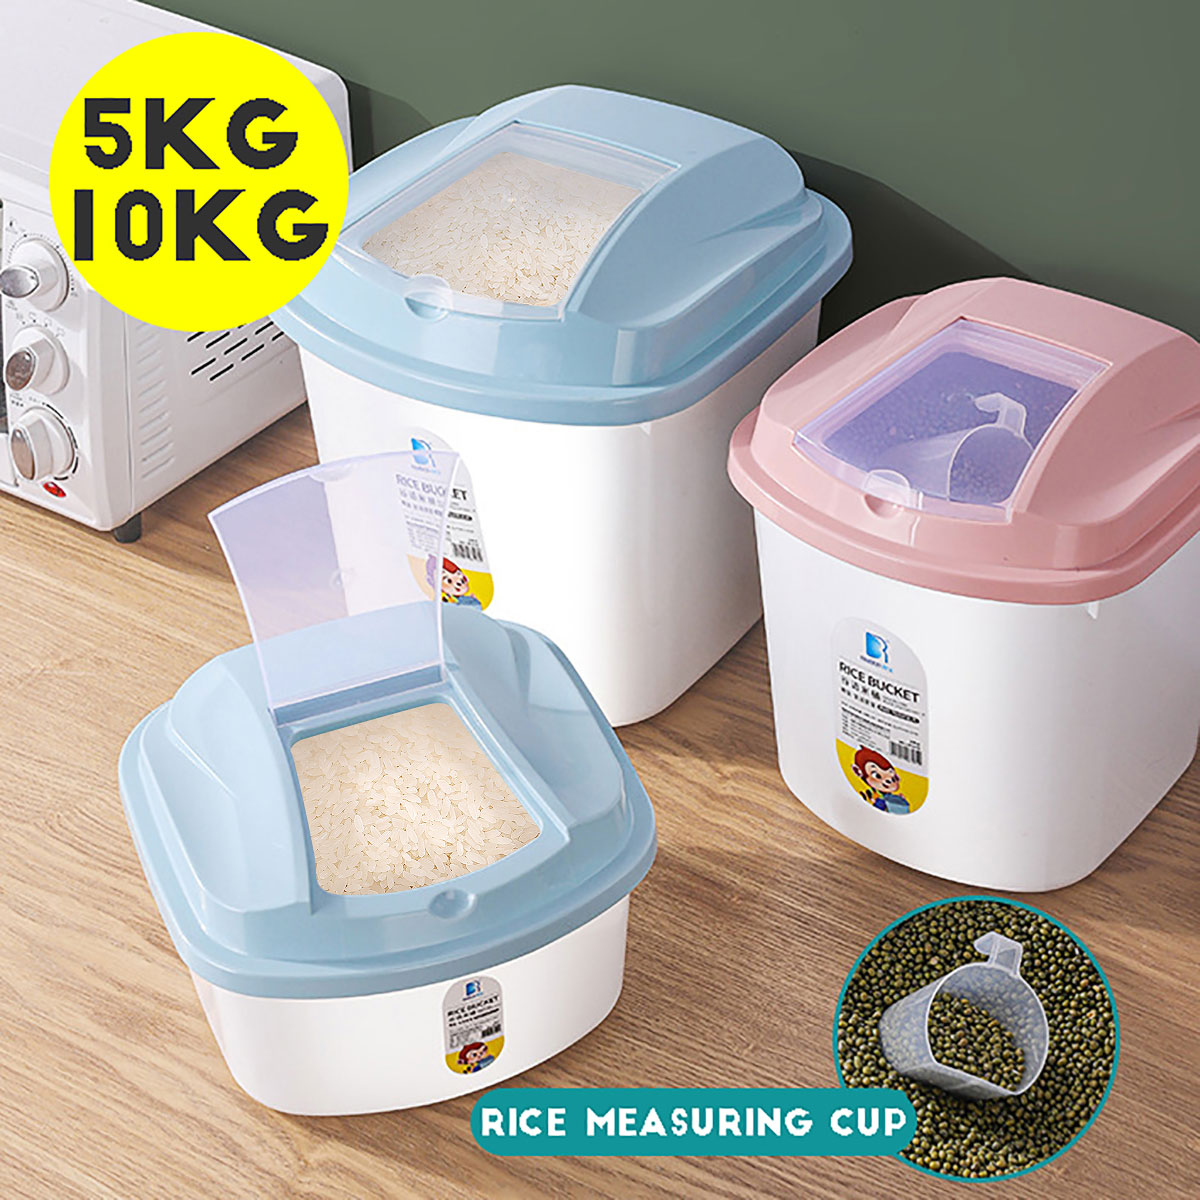 Airtight-Pet-Food-Storage-Container-Rice-Bucket-Storage-Container-Box-for-Storing-Rice-Flour-Dry-Foo-1857848-3